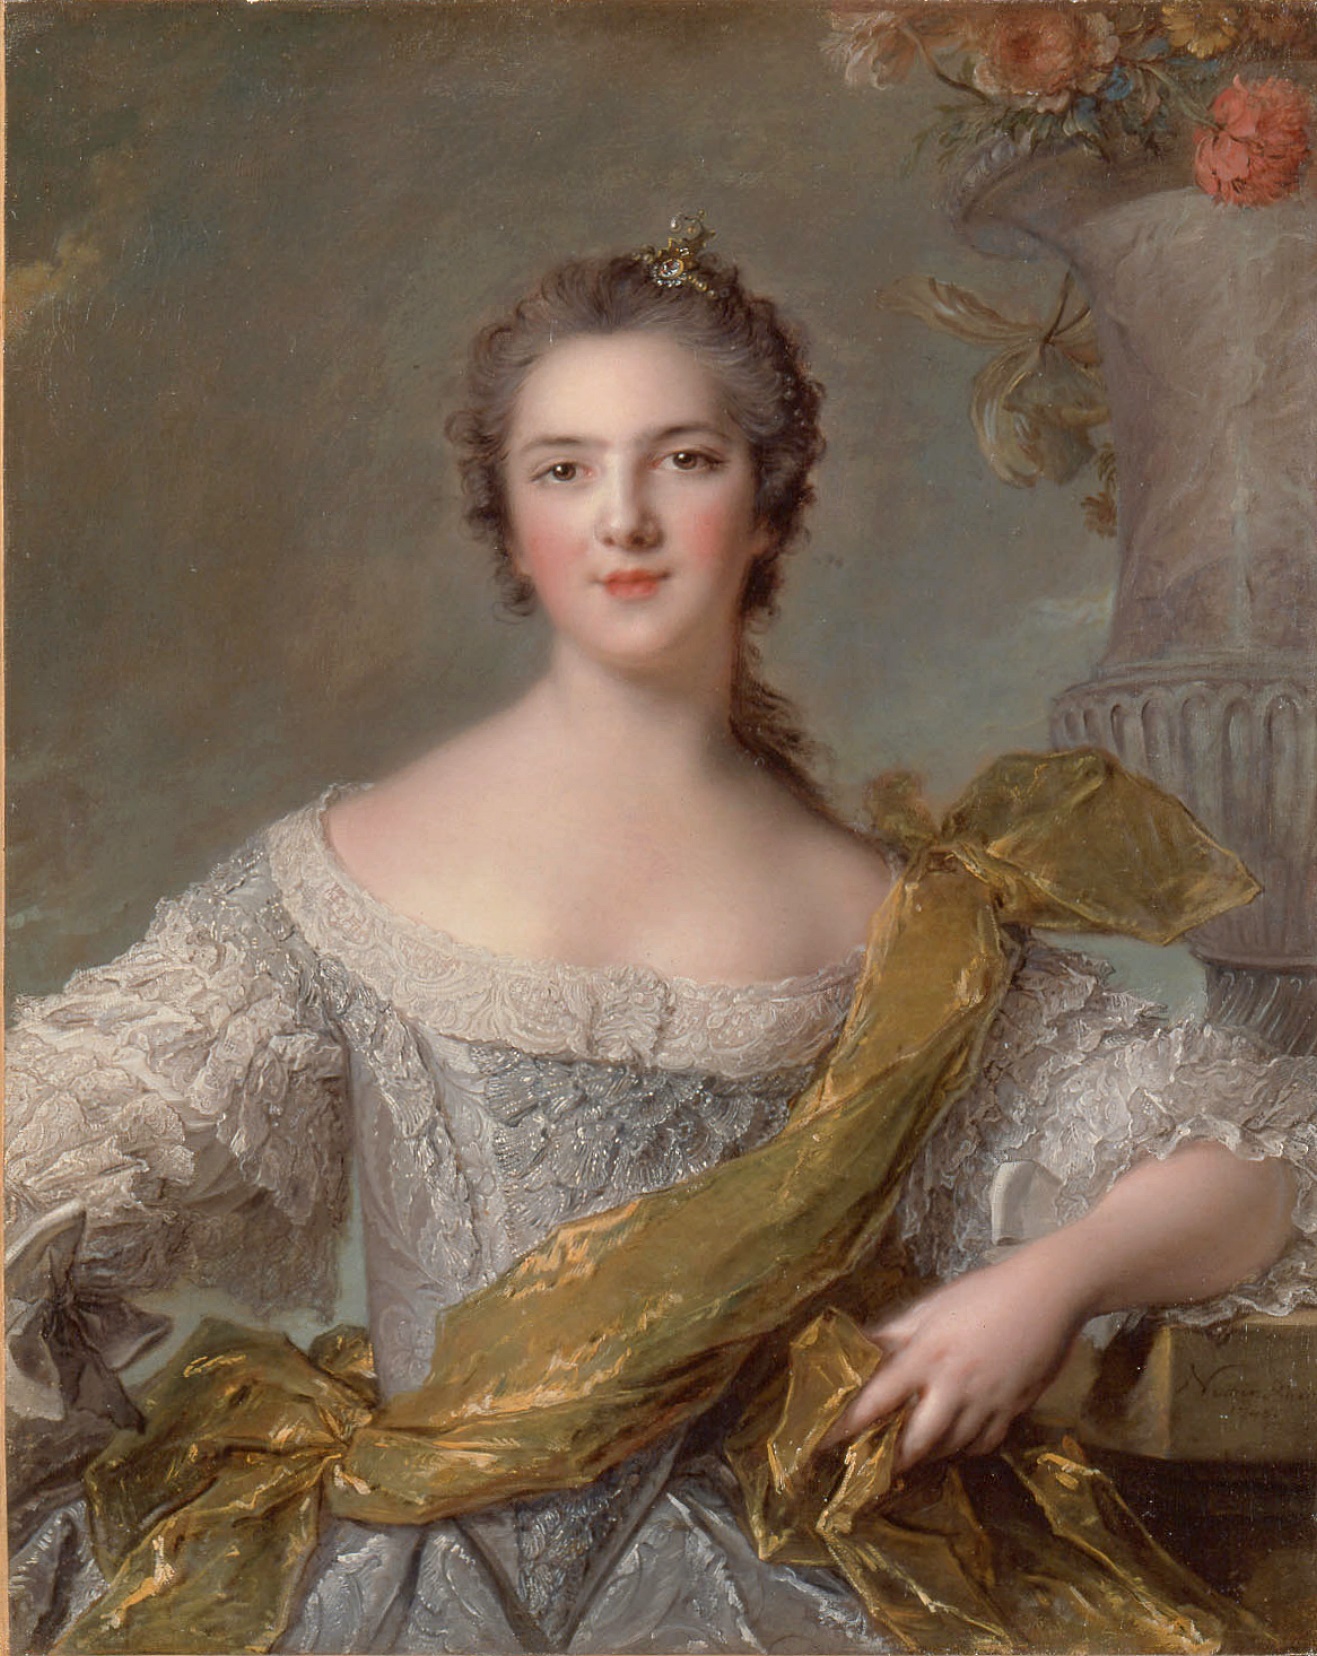 On Louis XV, the Girls of Deer Park, and a Monarchy in Decline